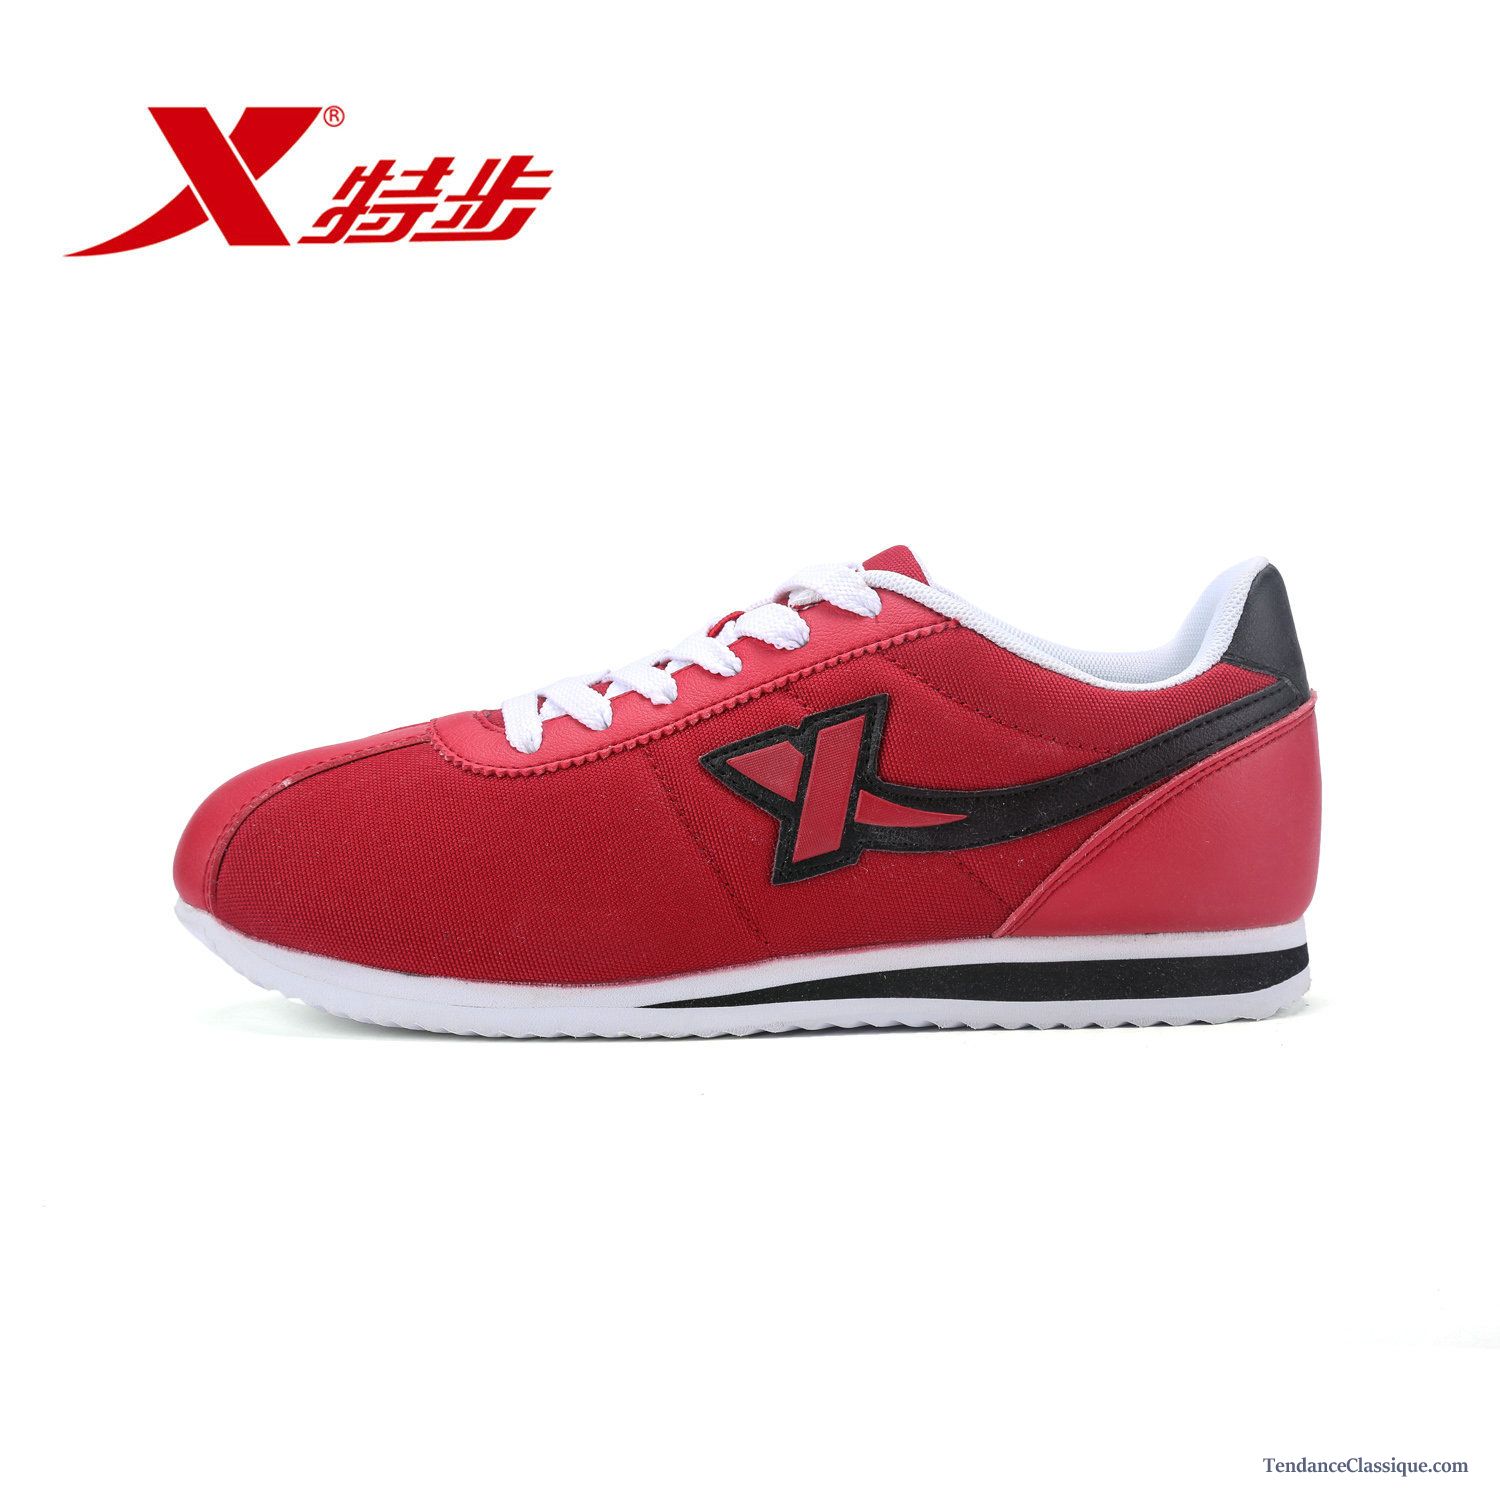 Chaussure Pour Courir Homme, Chaussures De Running Homme Soldes